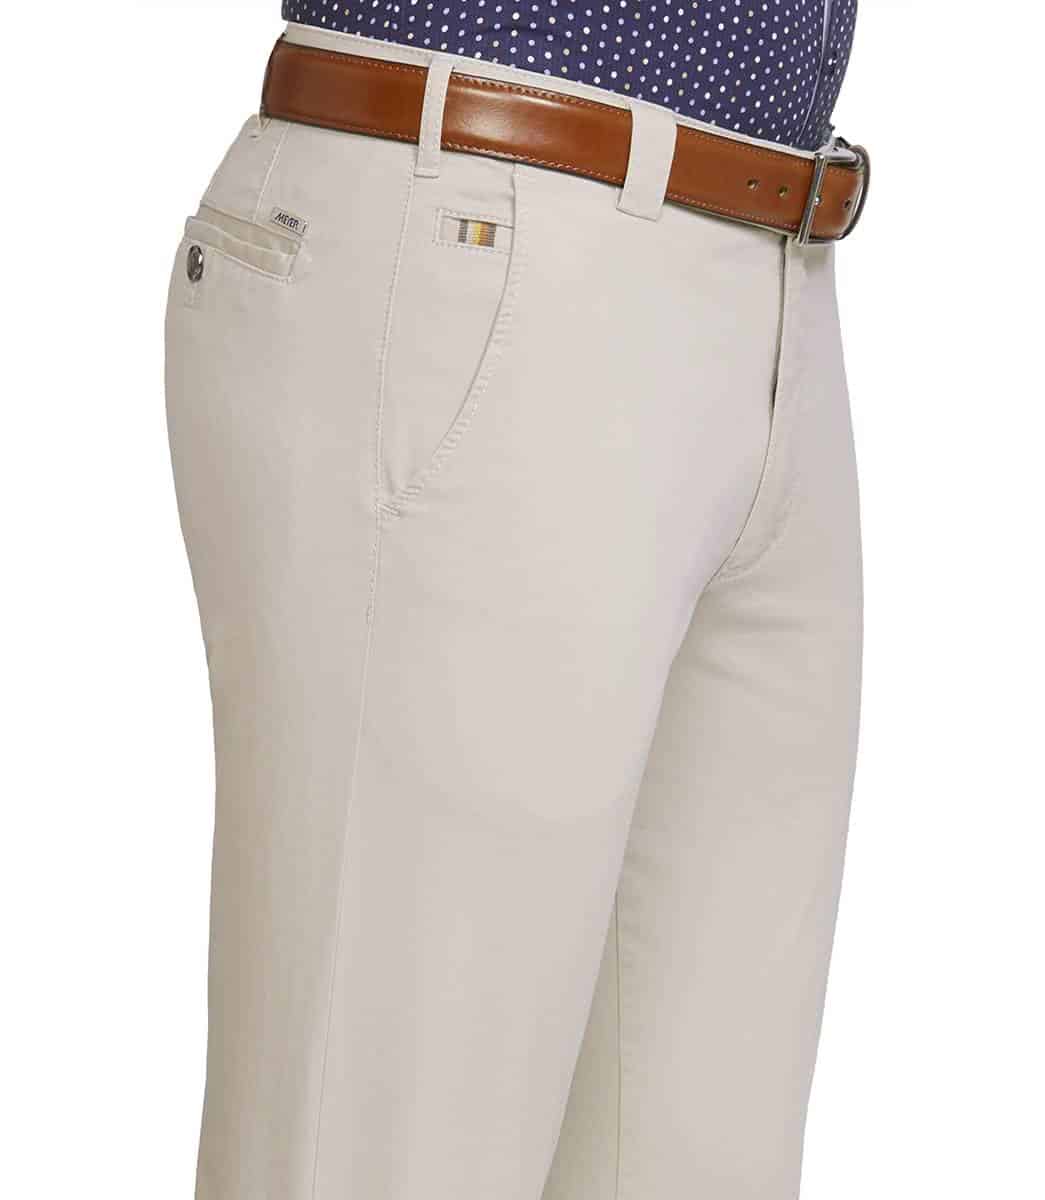 Stone Fairtrade Cotton Stretch Chinos by Smart Clothes York Yorkshire